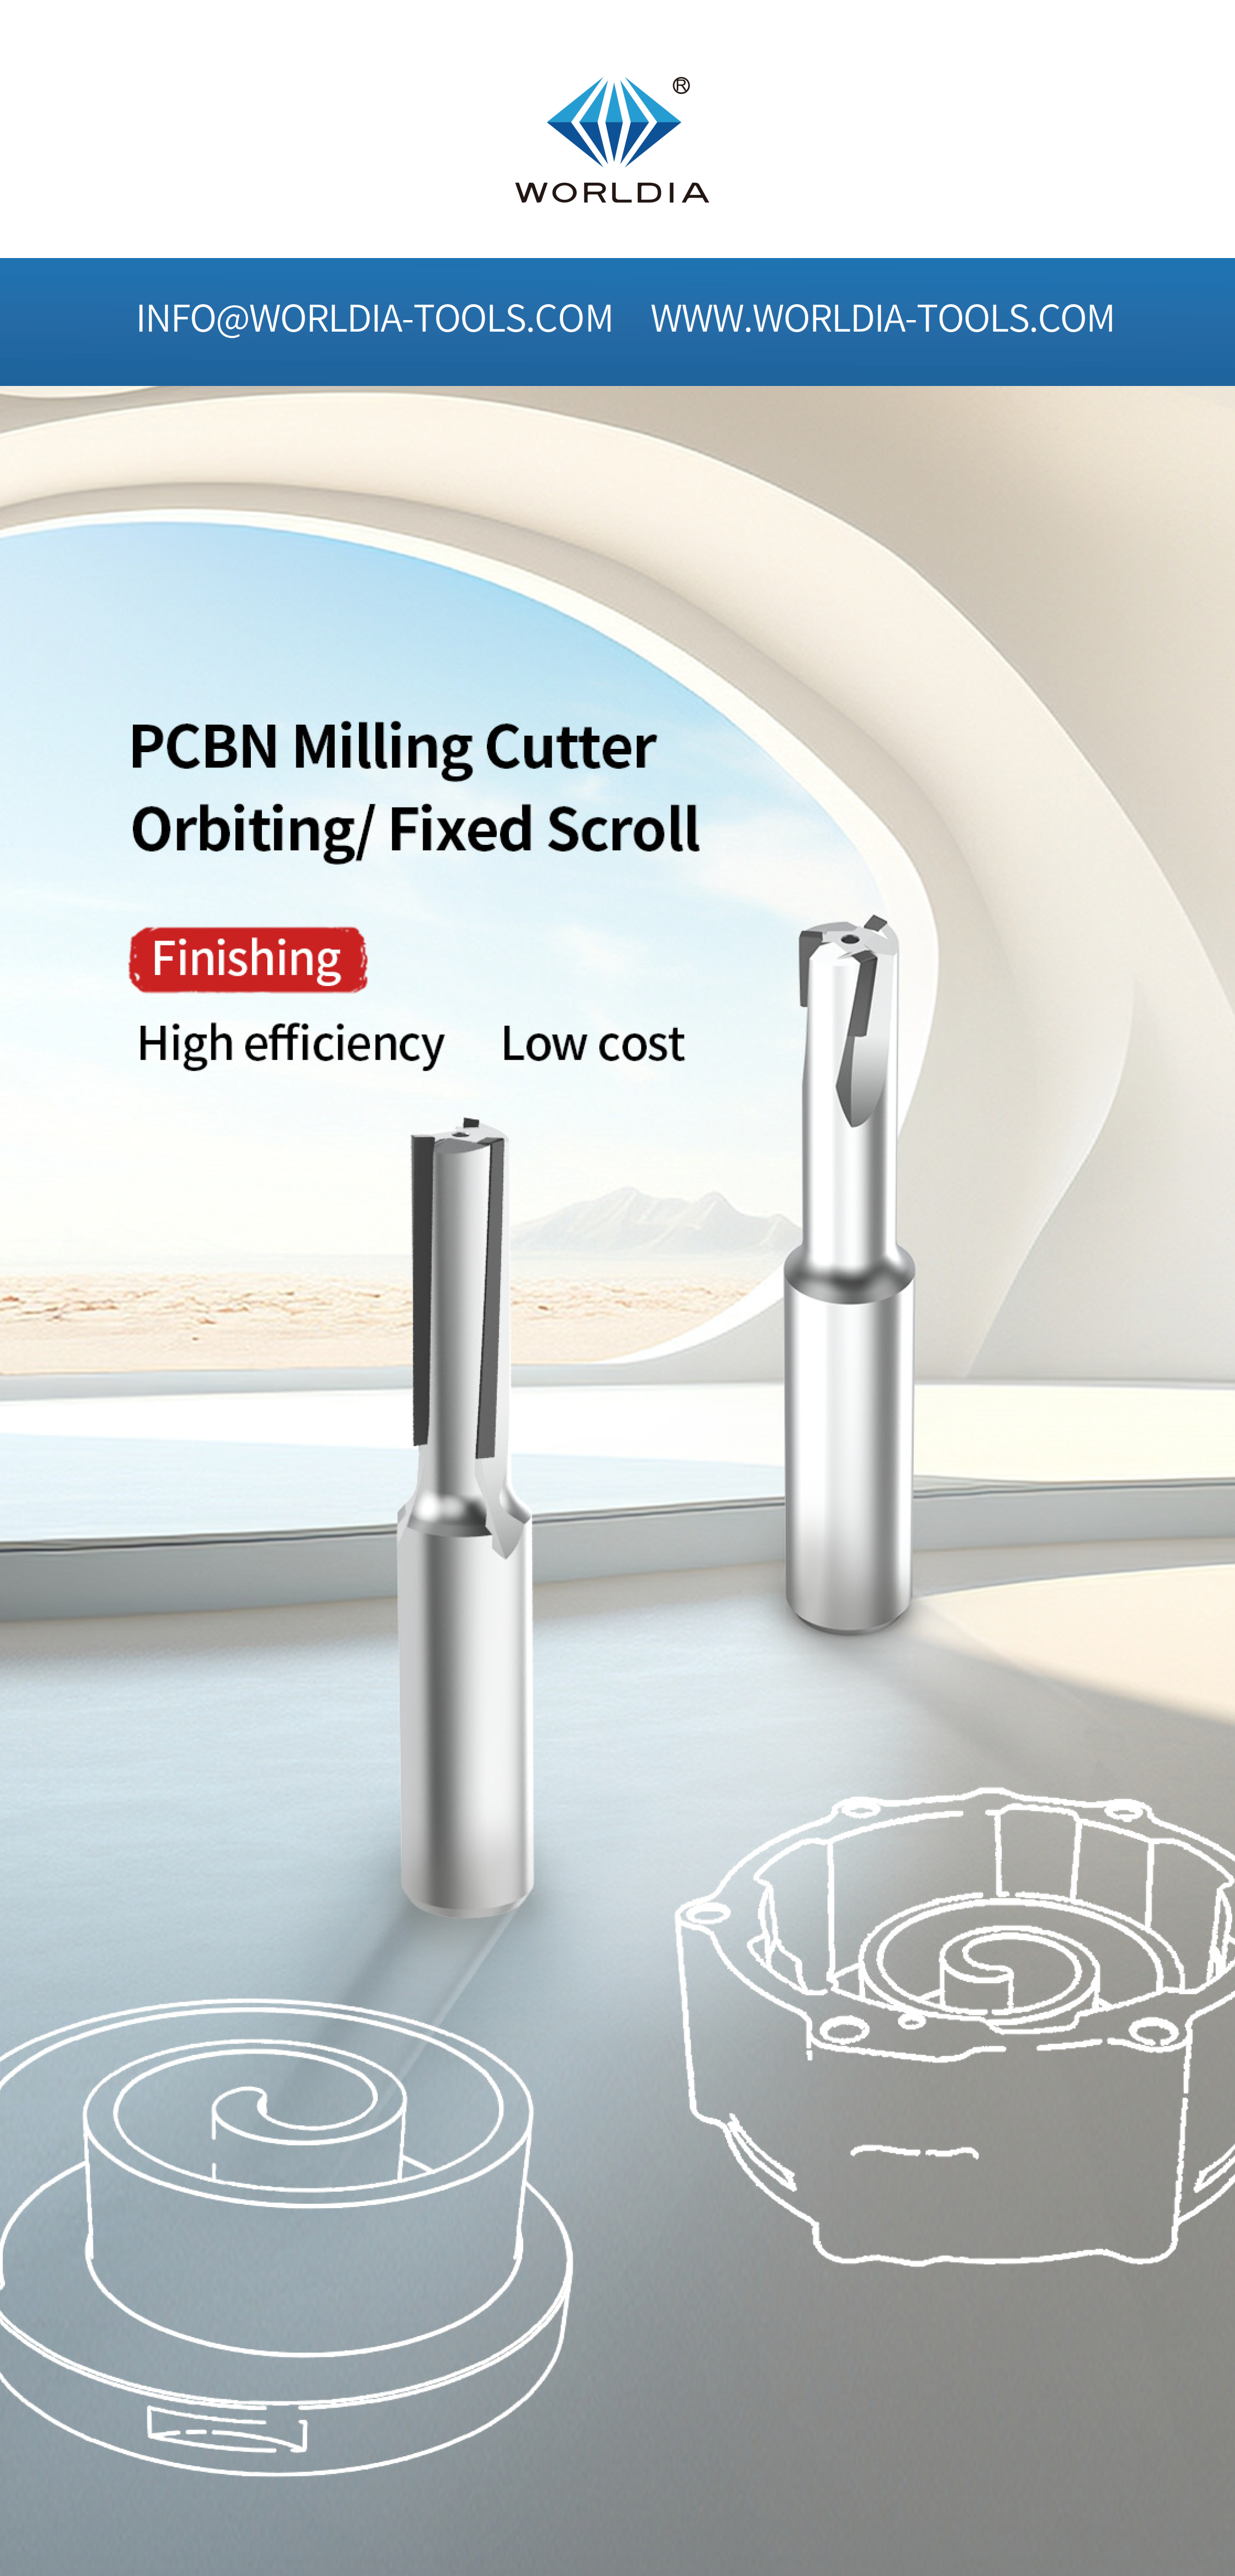 PCBN milling cutter for finishing orbiting/fixed Scroll!